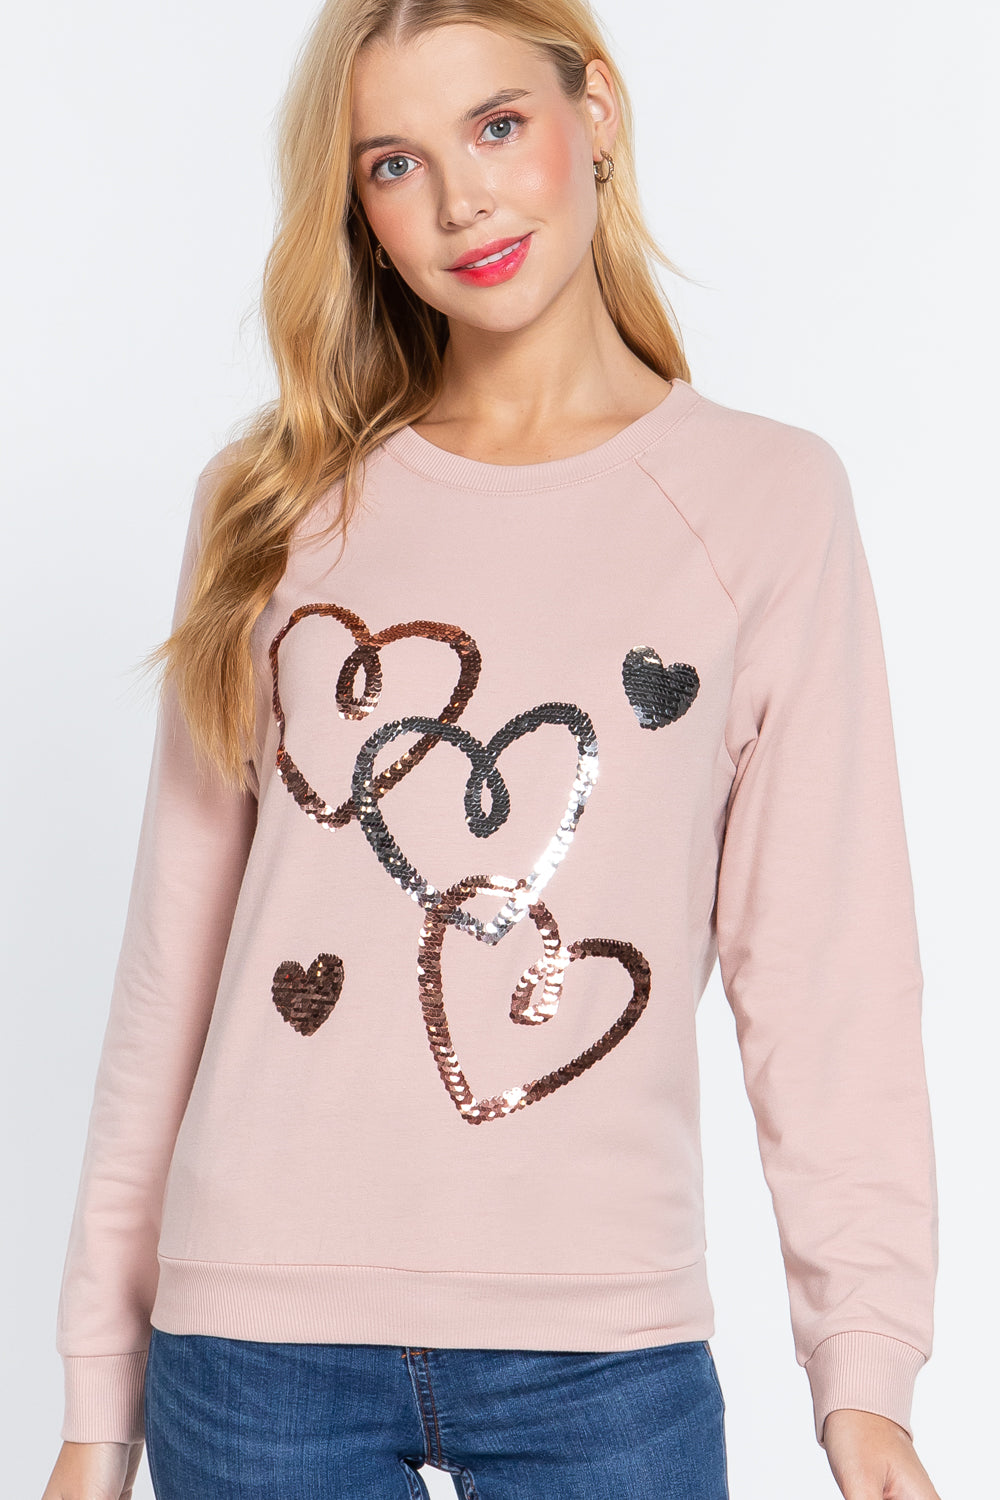 Long Sleeve Sequins French Terry Pullover Top in Pale Pink